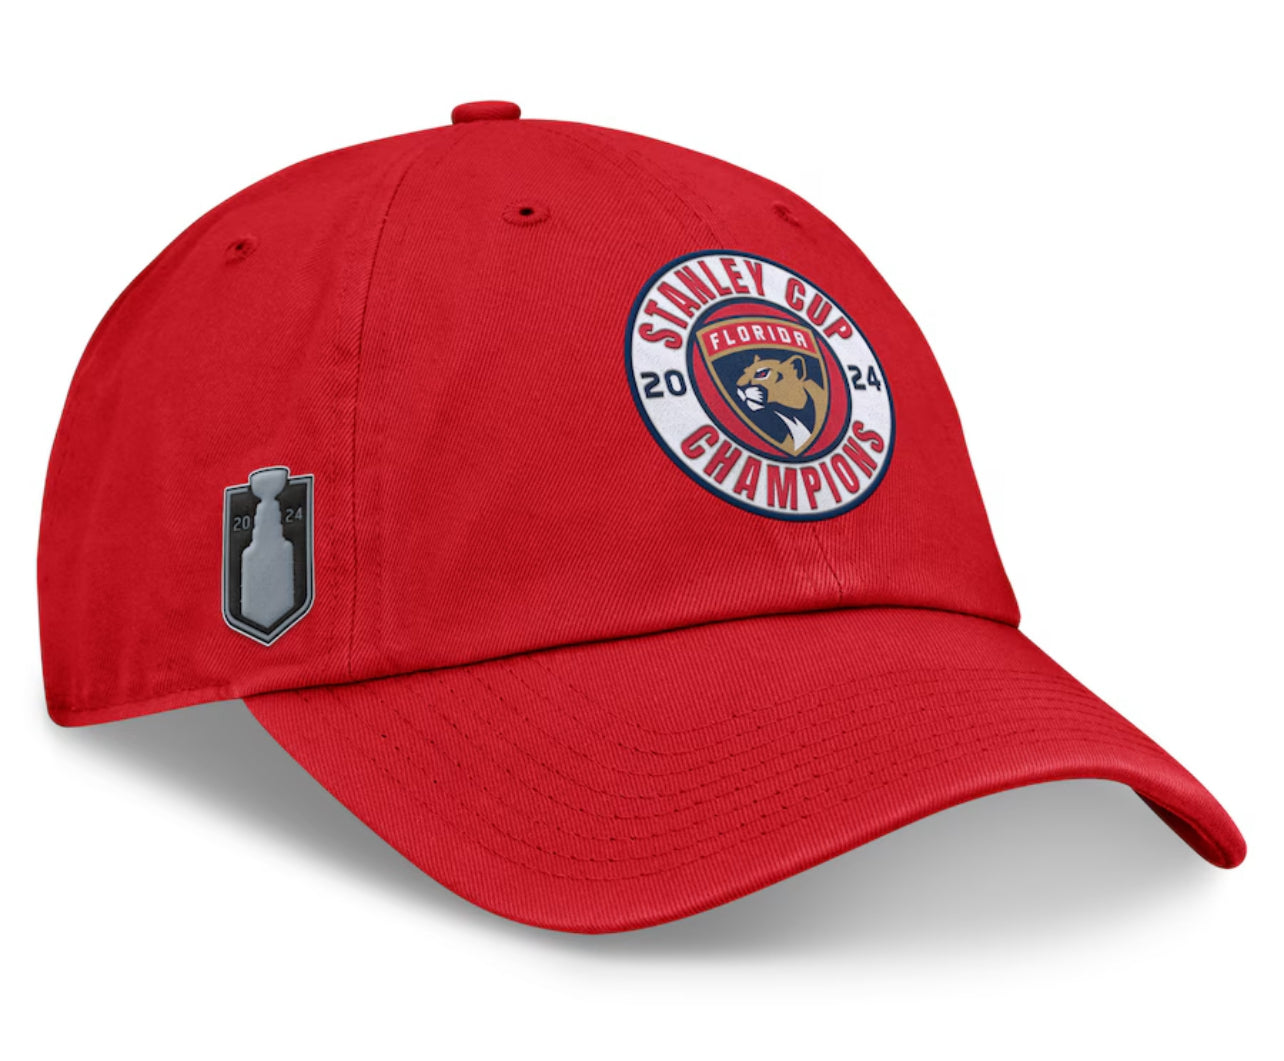 Florida Panthers 2024 Stanley Cup Champions Hometown 1 Hat - Red